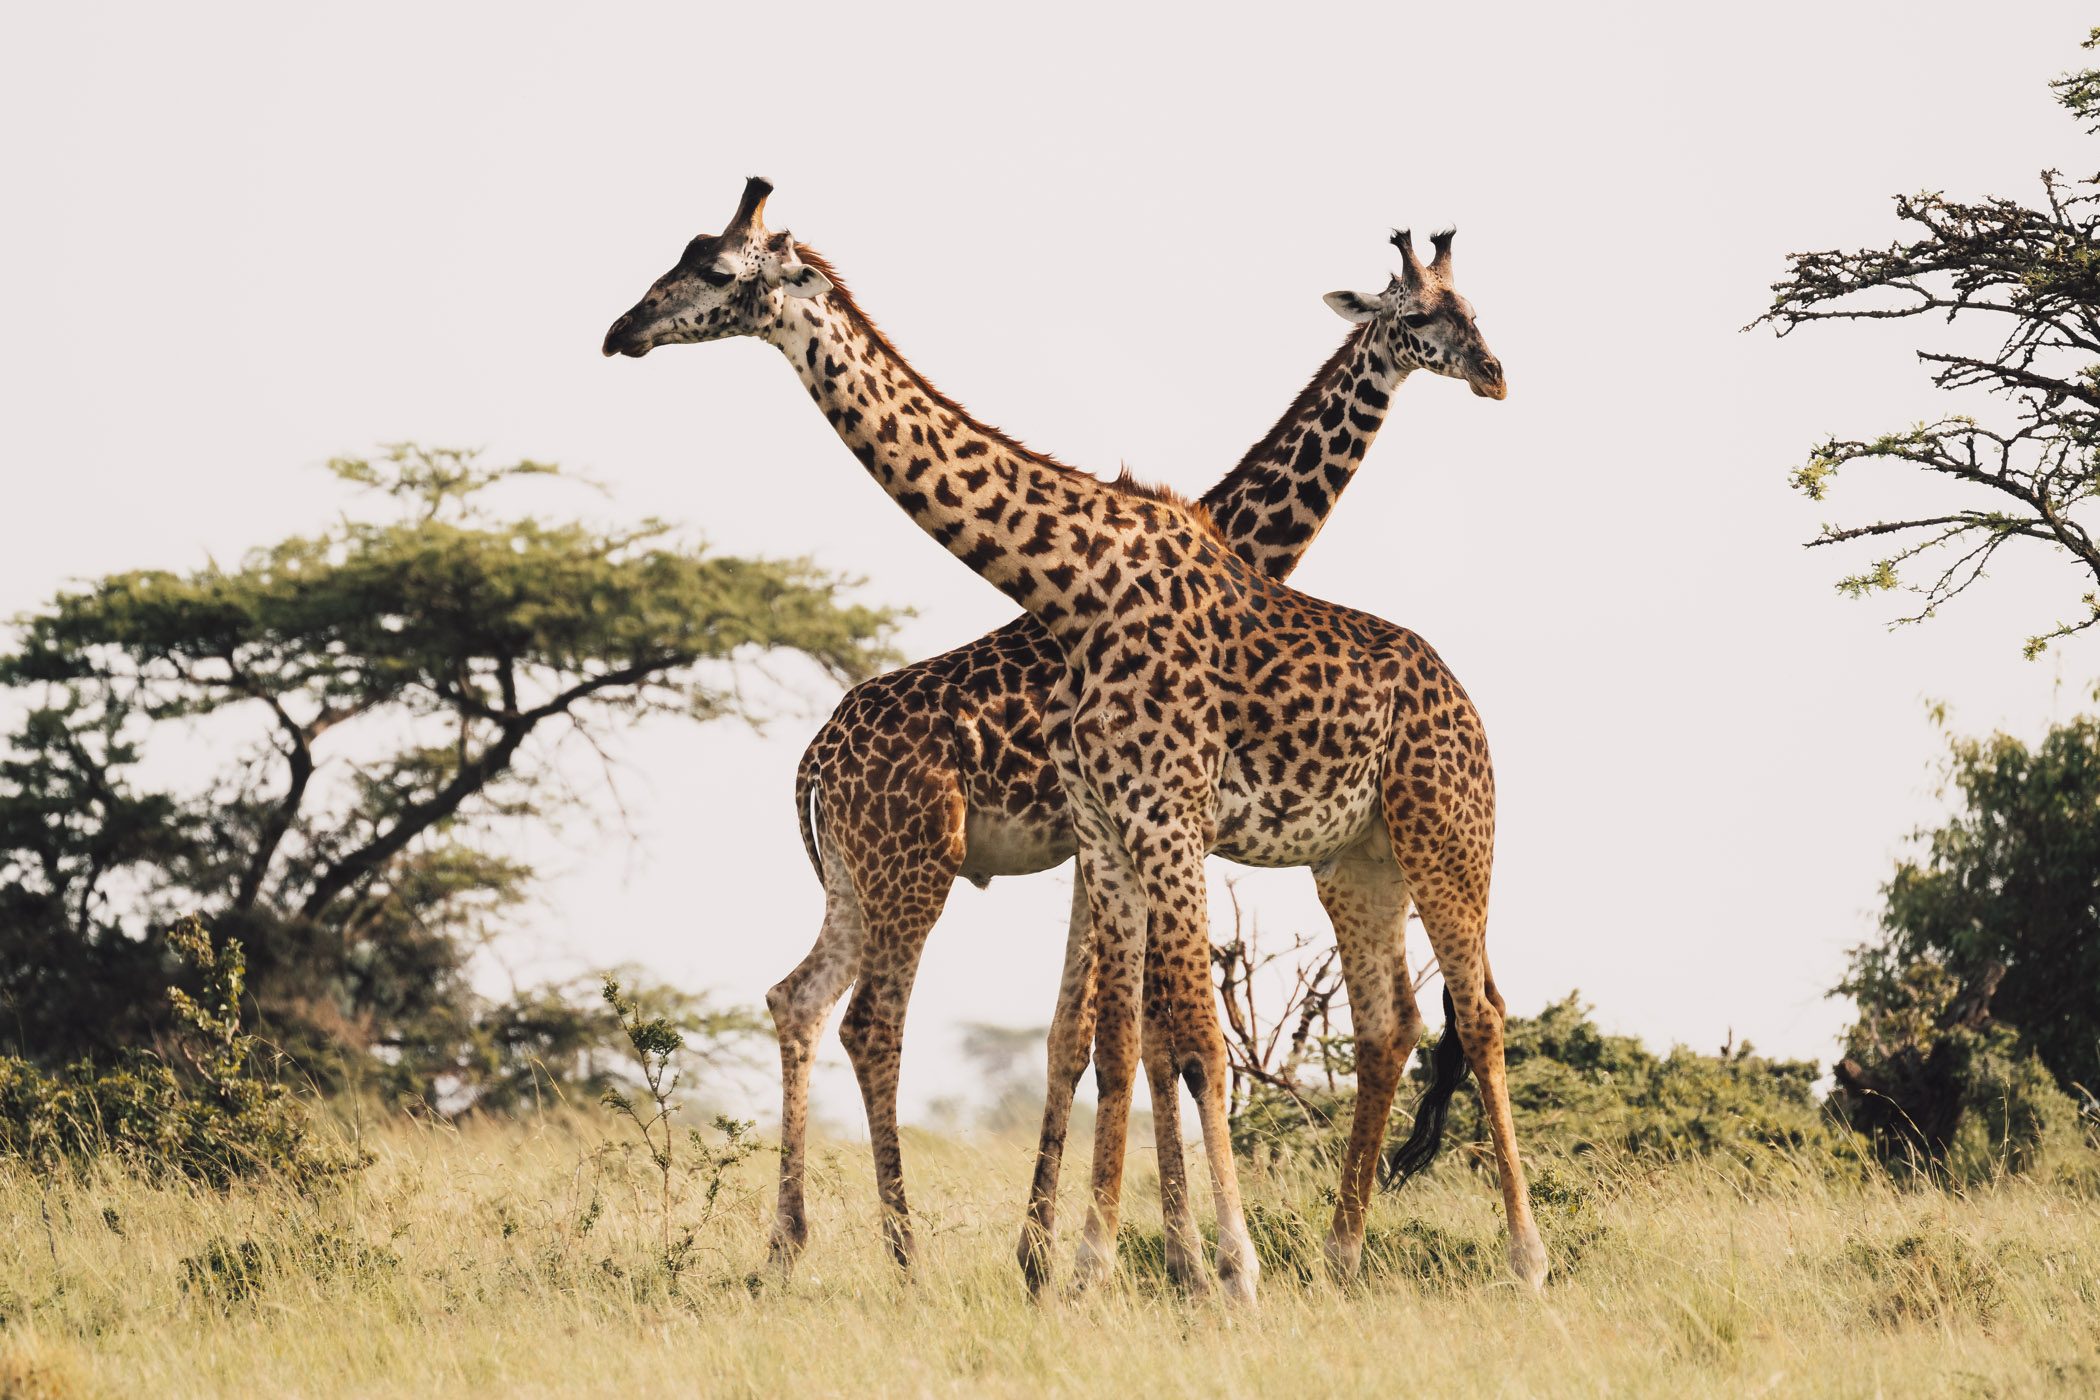 Two giraffes crossing just before they started fighting in the Maasai Mara